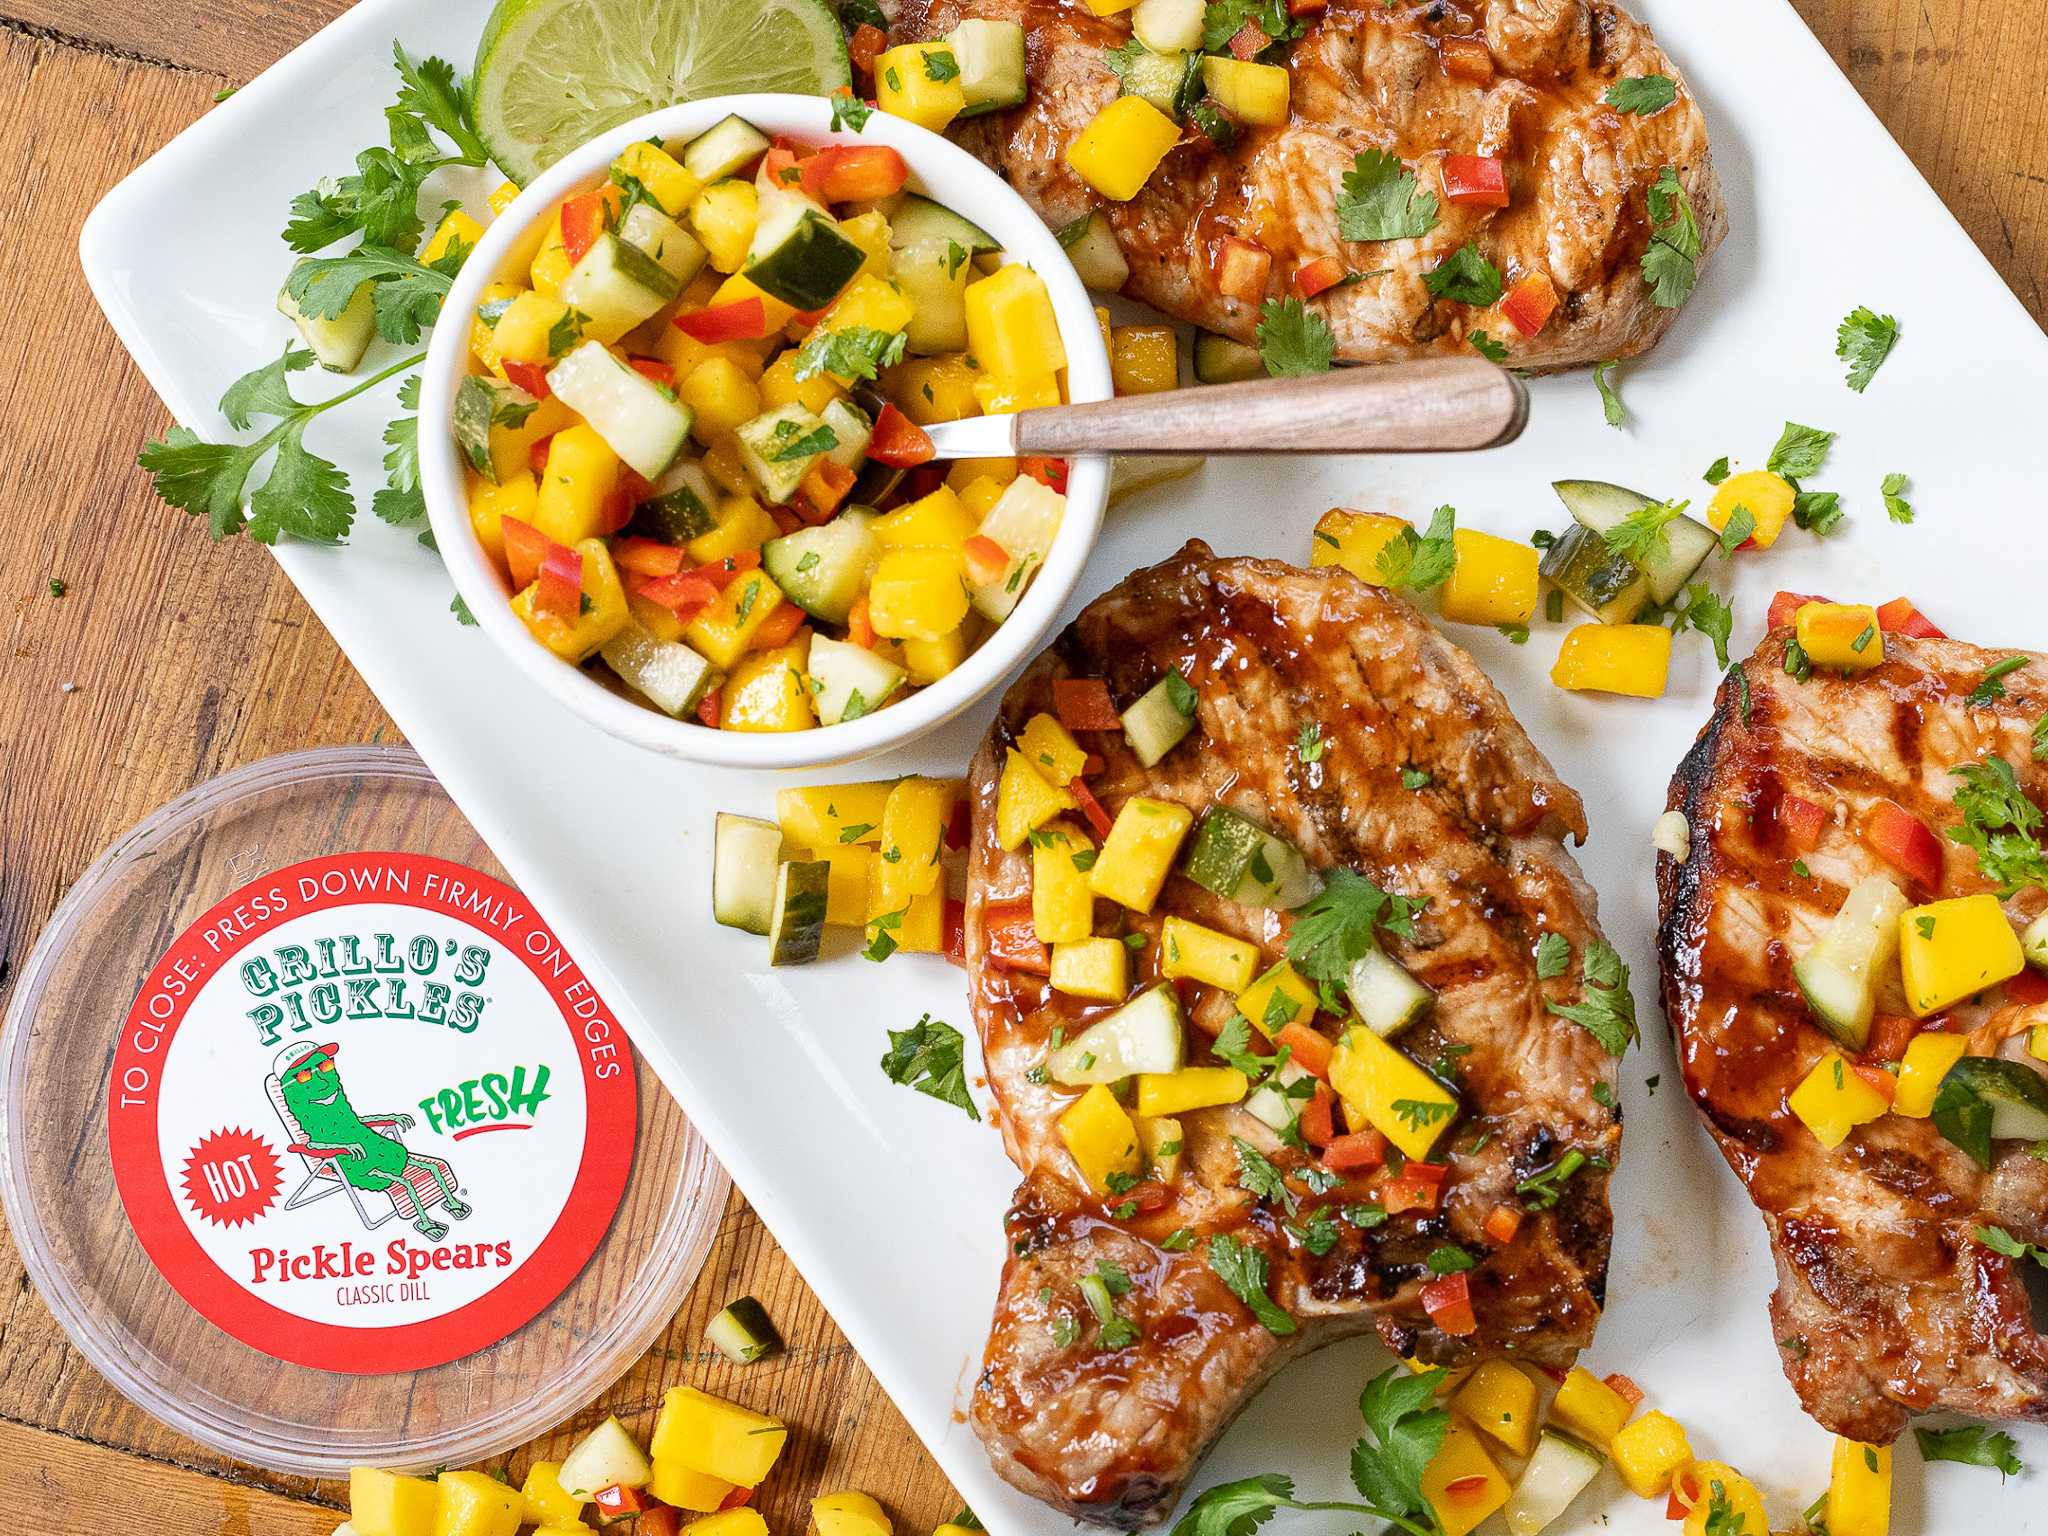 Grab Some Grillo’s Pickles & Serve Up My Grilled BBQ Pork Chops With Hot Pickle & Mango Relish At Your Memorial Day Gathering